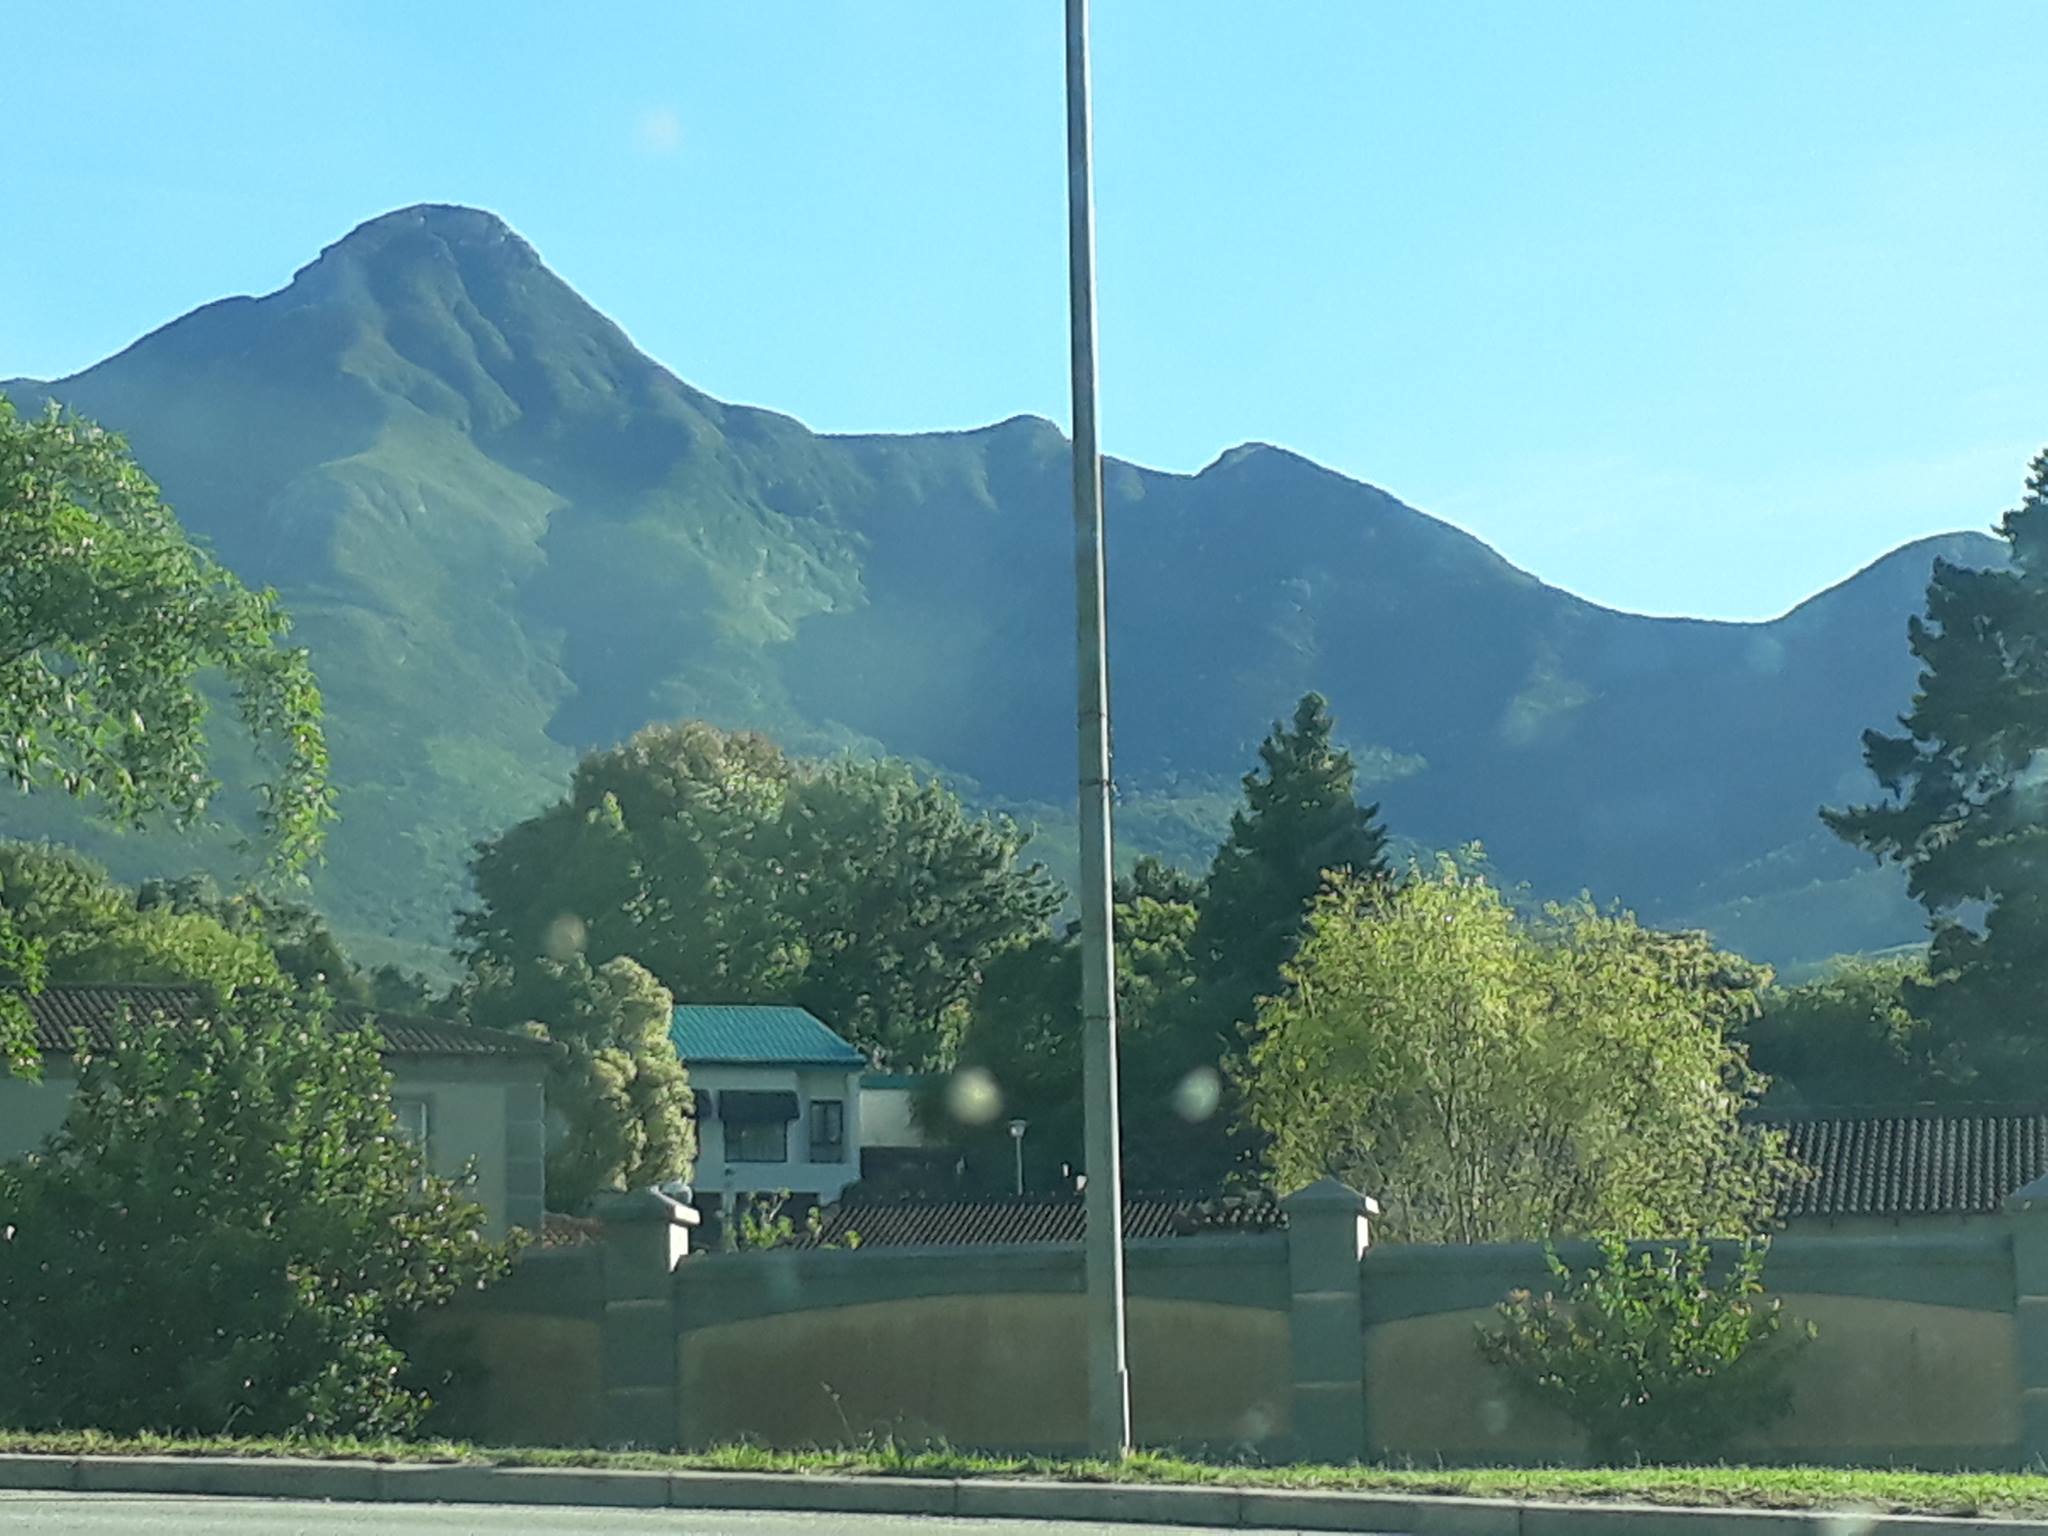 The stunning beautiful mountain and sunny day that greeted me as I drove out of the hospital.